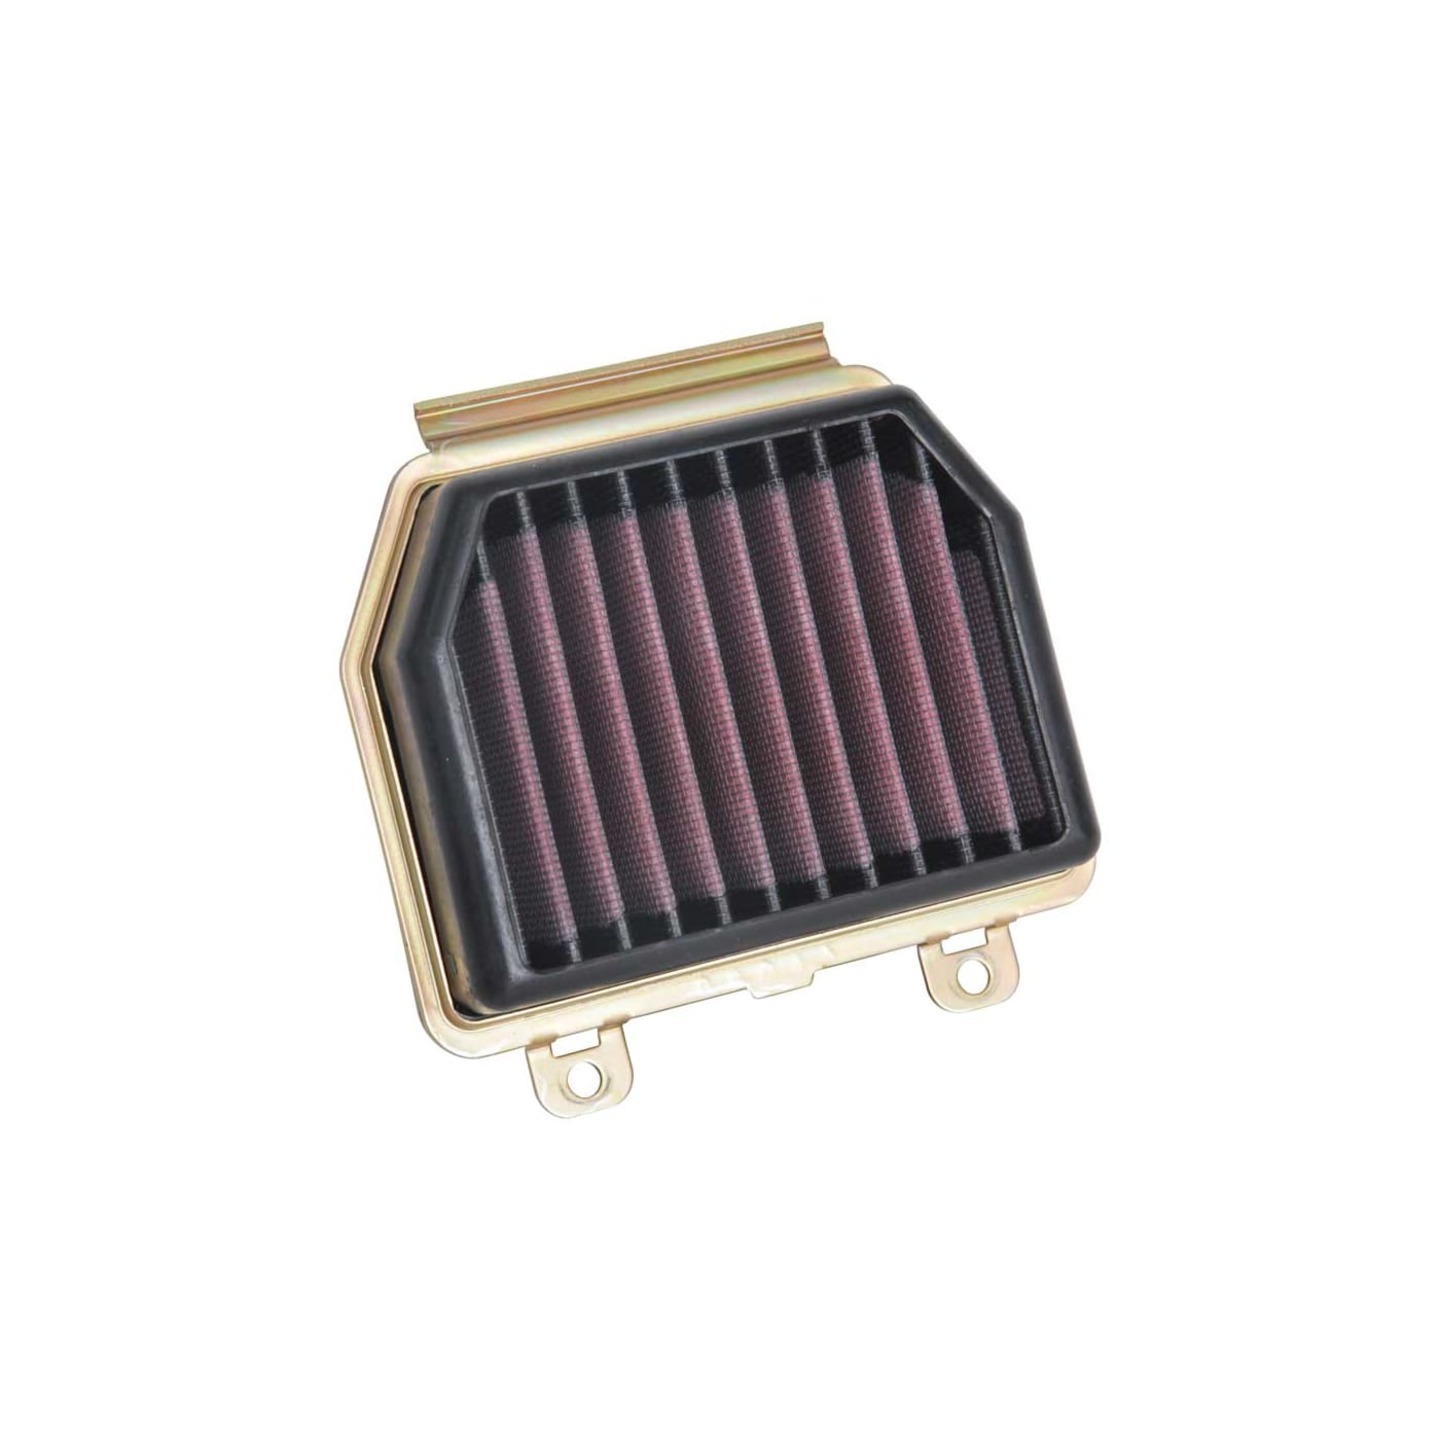 Honda CB300R CB125R CB250R CBF250 CBF125 HA-2819 high flow K&N air filter reusable washable